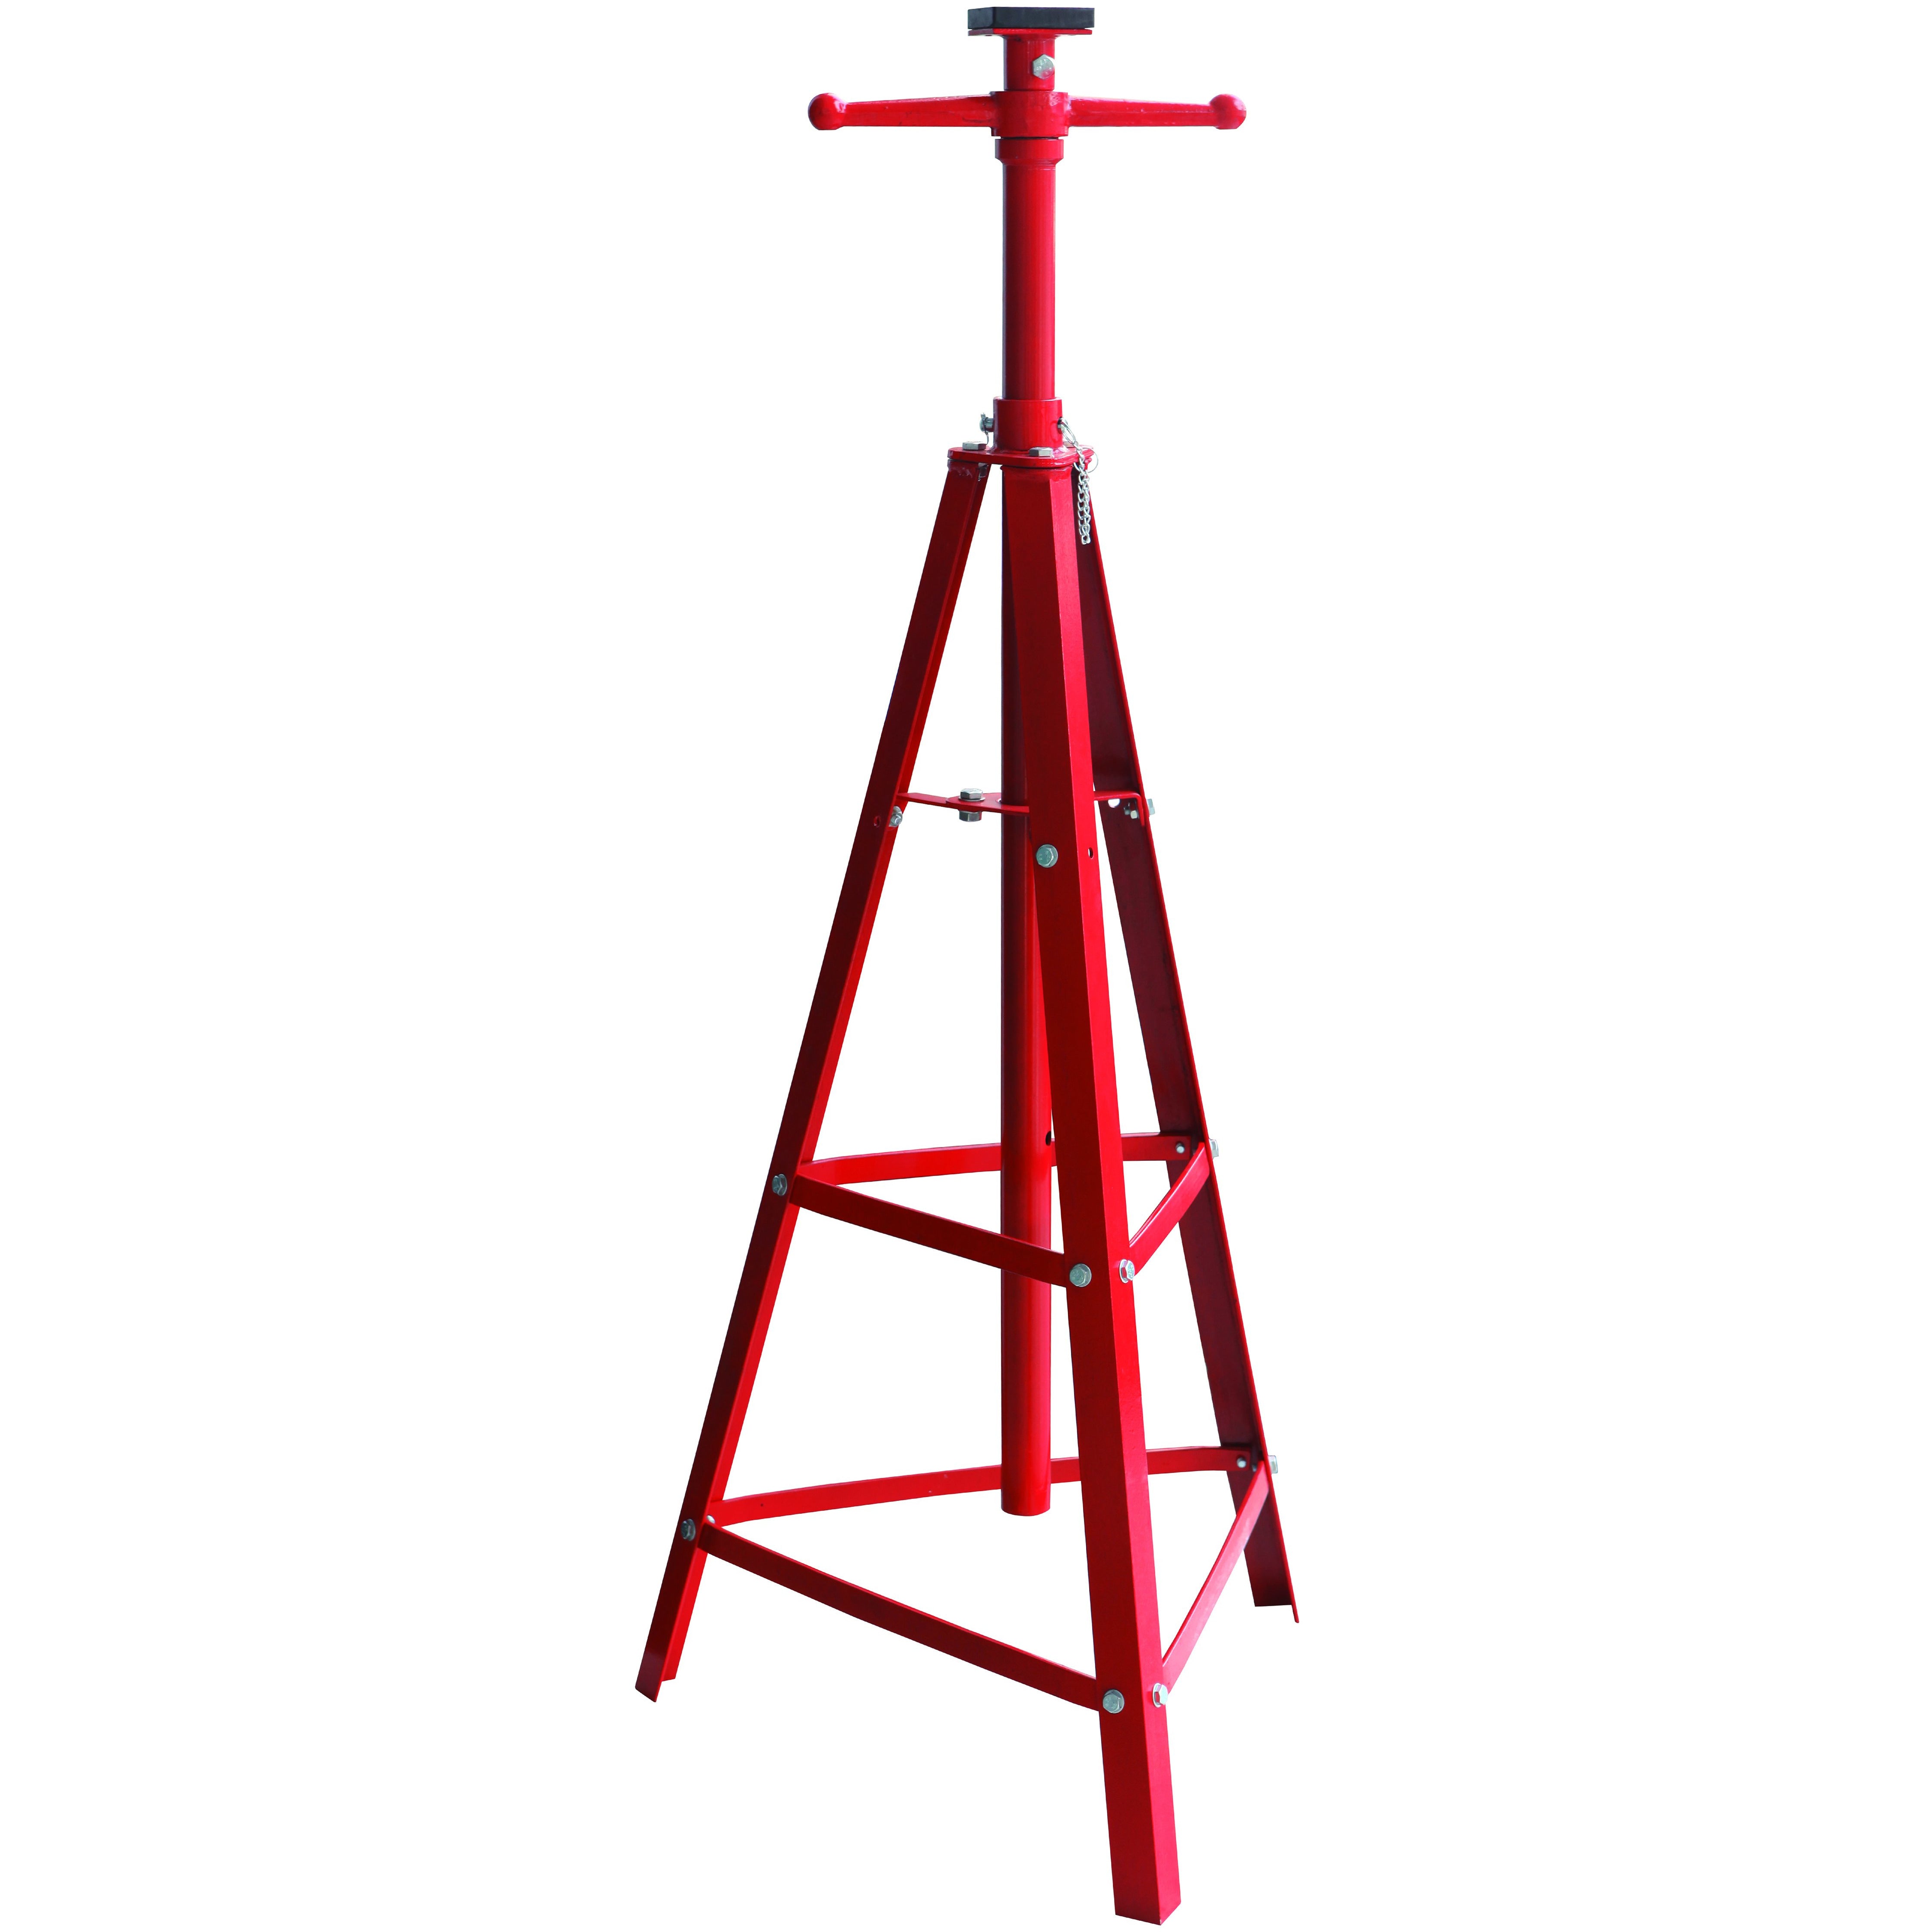 High Position Jack Stand 2 Ton Min Ht 1250mm / Max Ht 2128mm-Workshop Equipment-Tool Factory